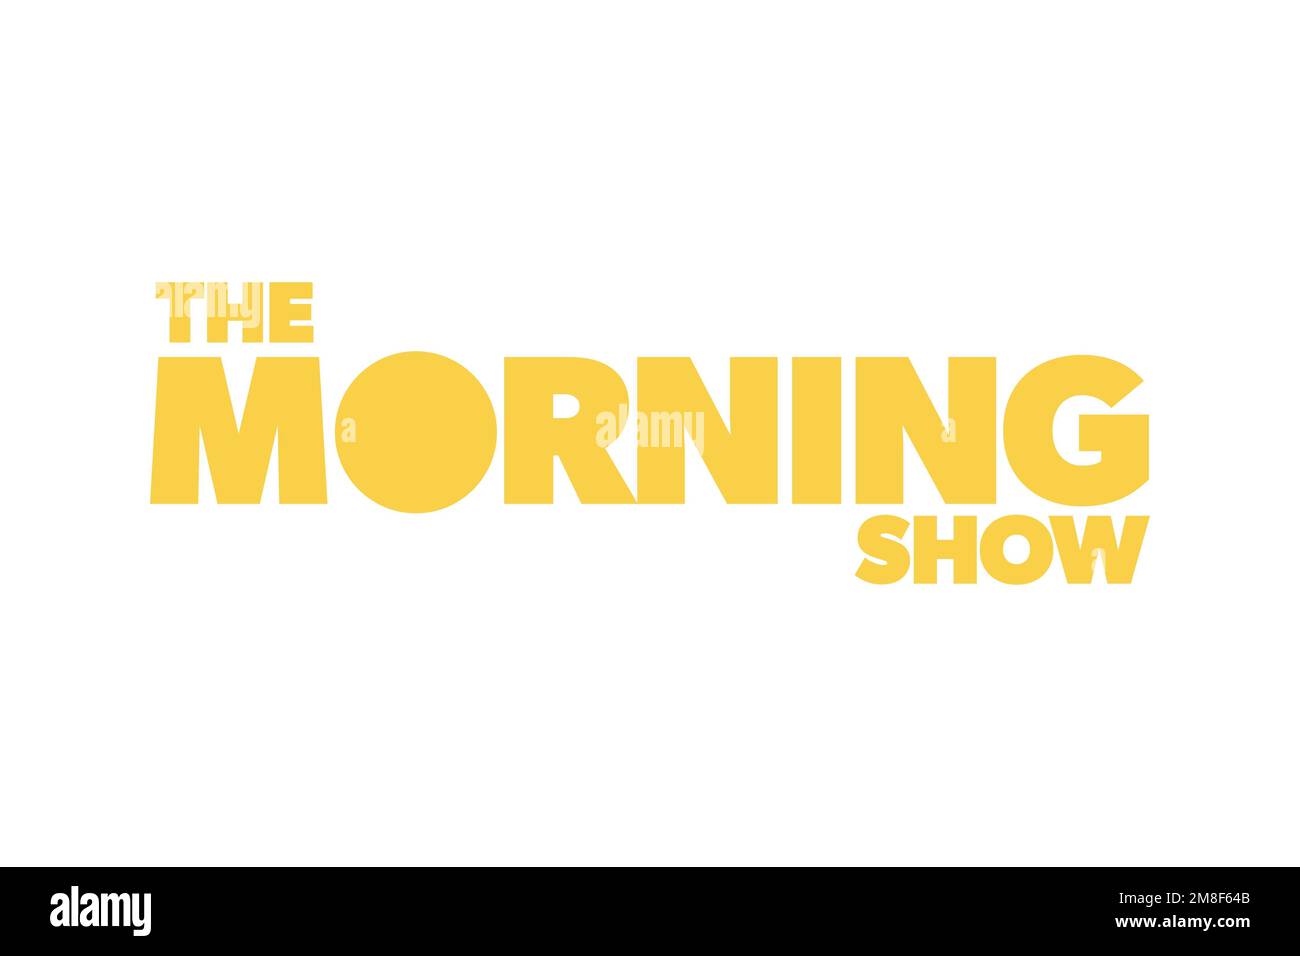 The Morning Show American TV series, logo, fond blanc Banque D'Images